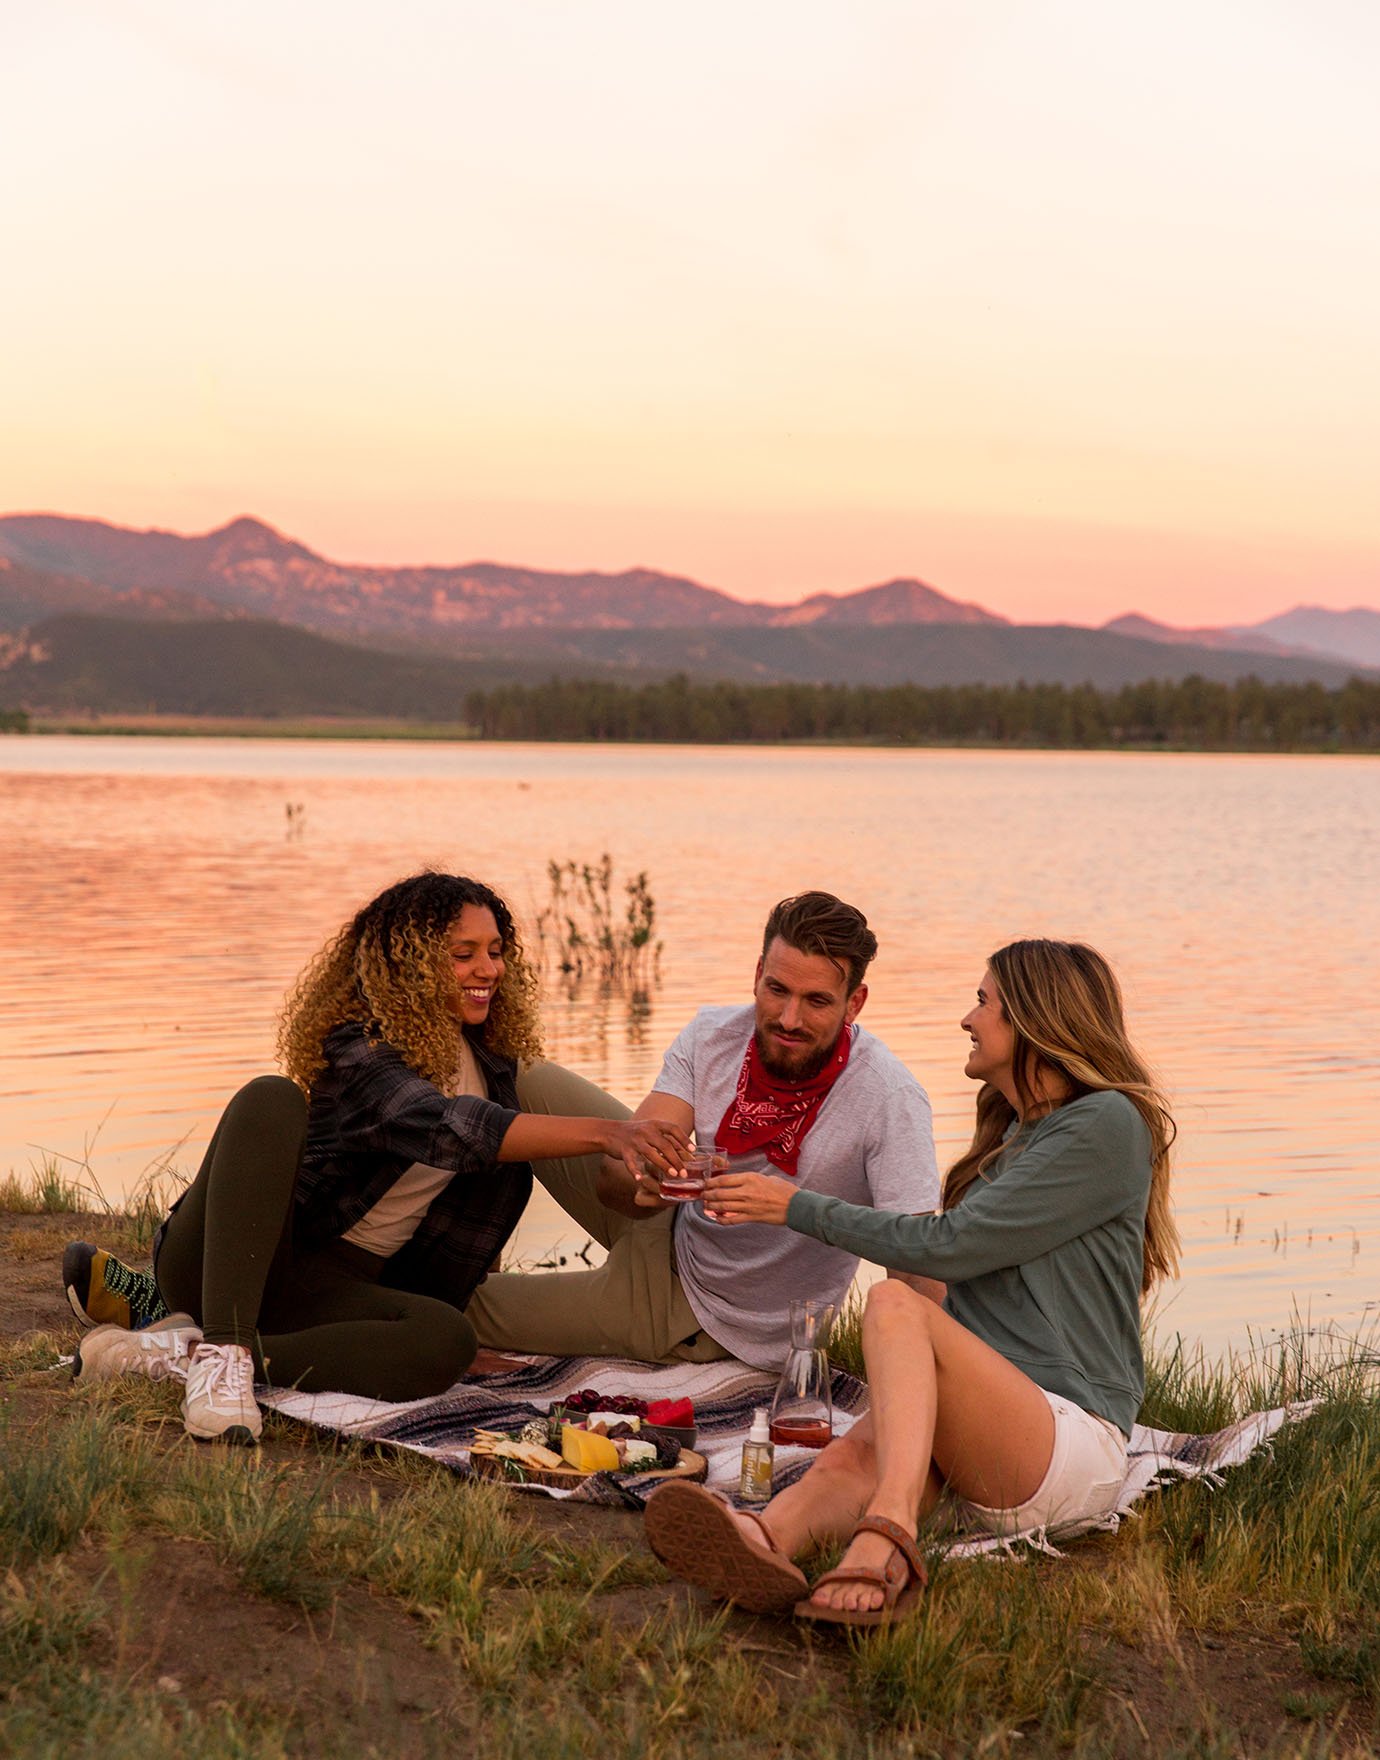 A group of two women and one man sit on a picnic blanket next to a lake while the sun sets.